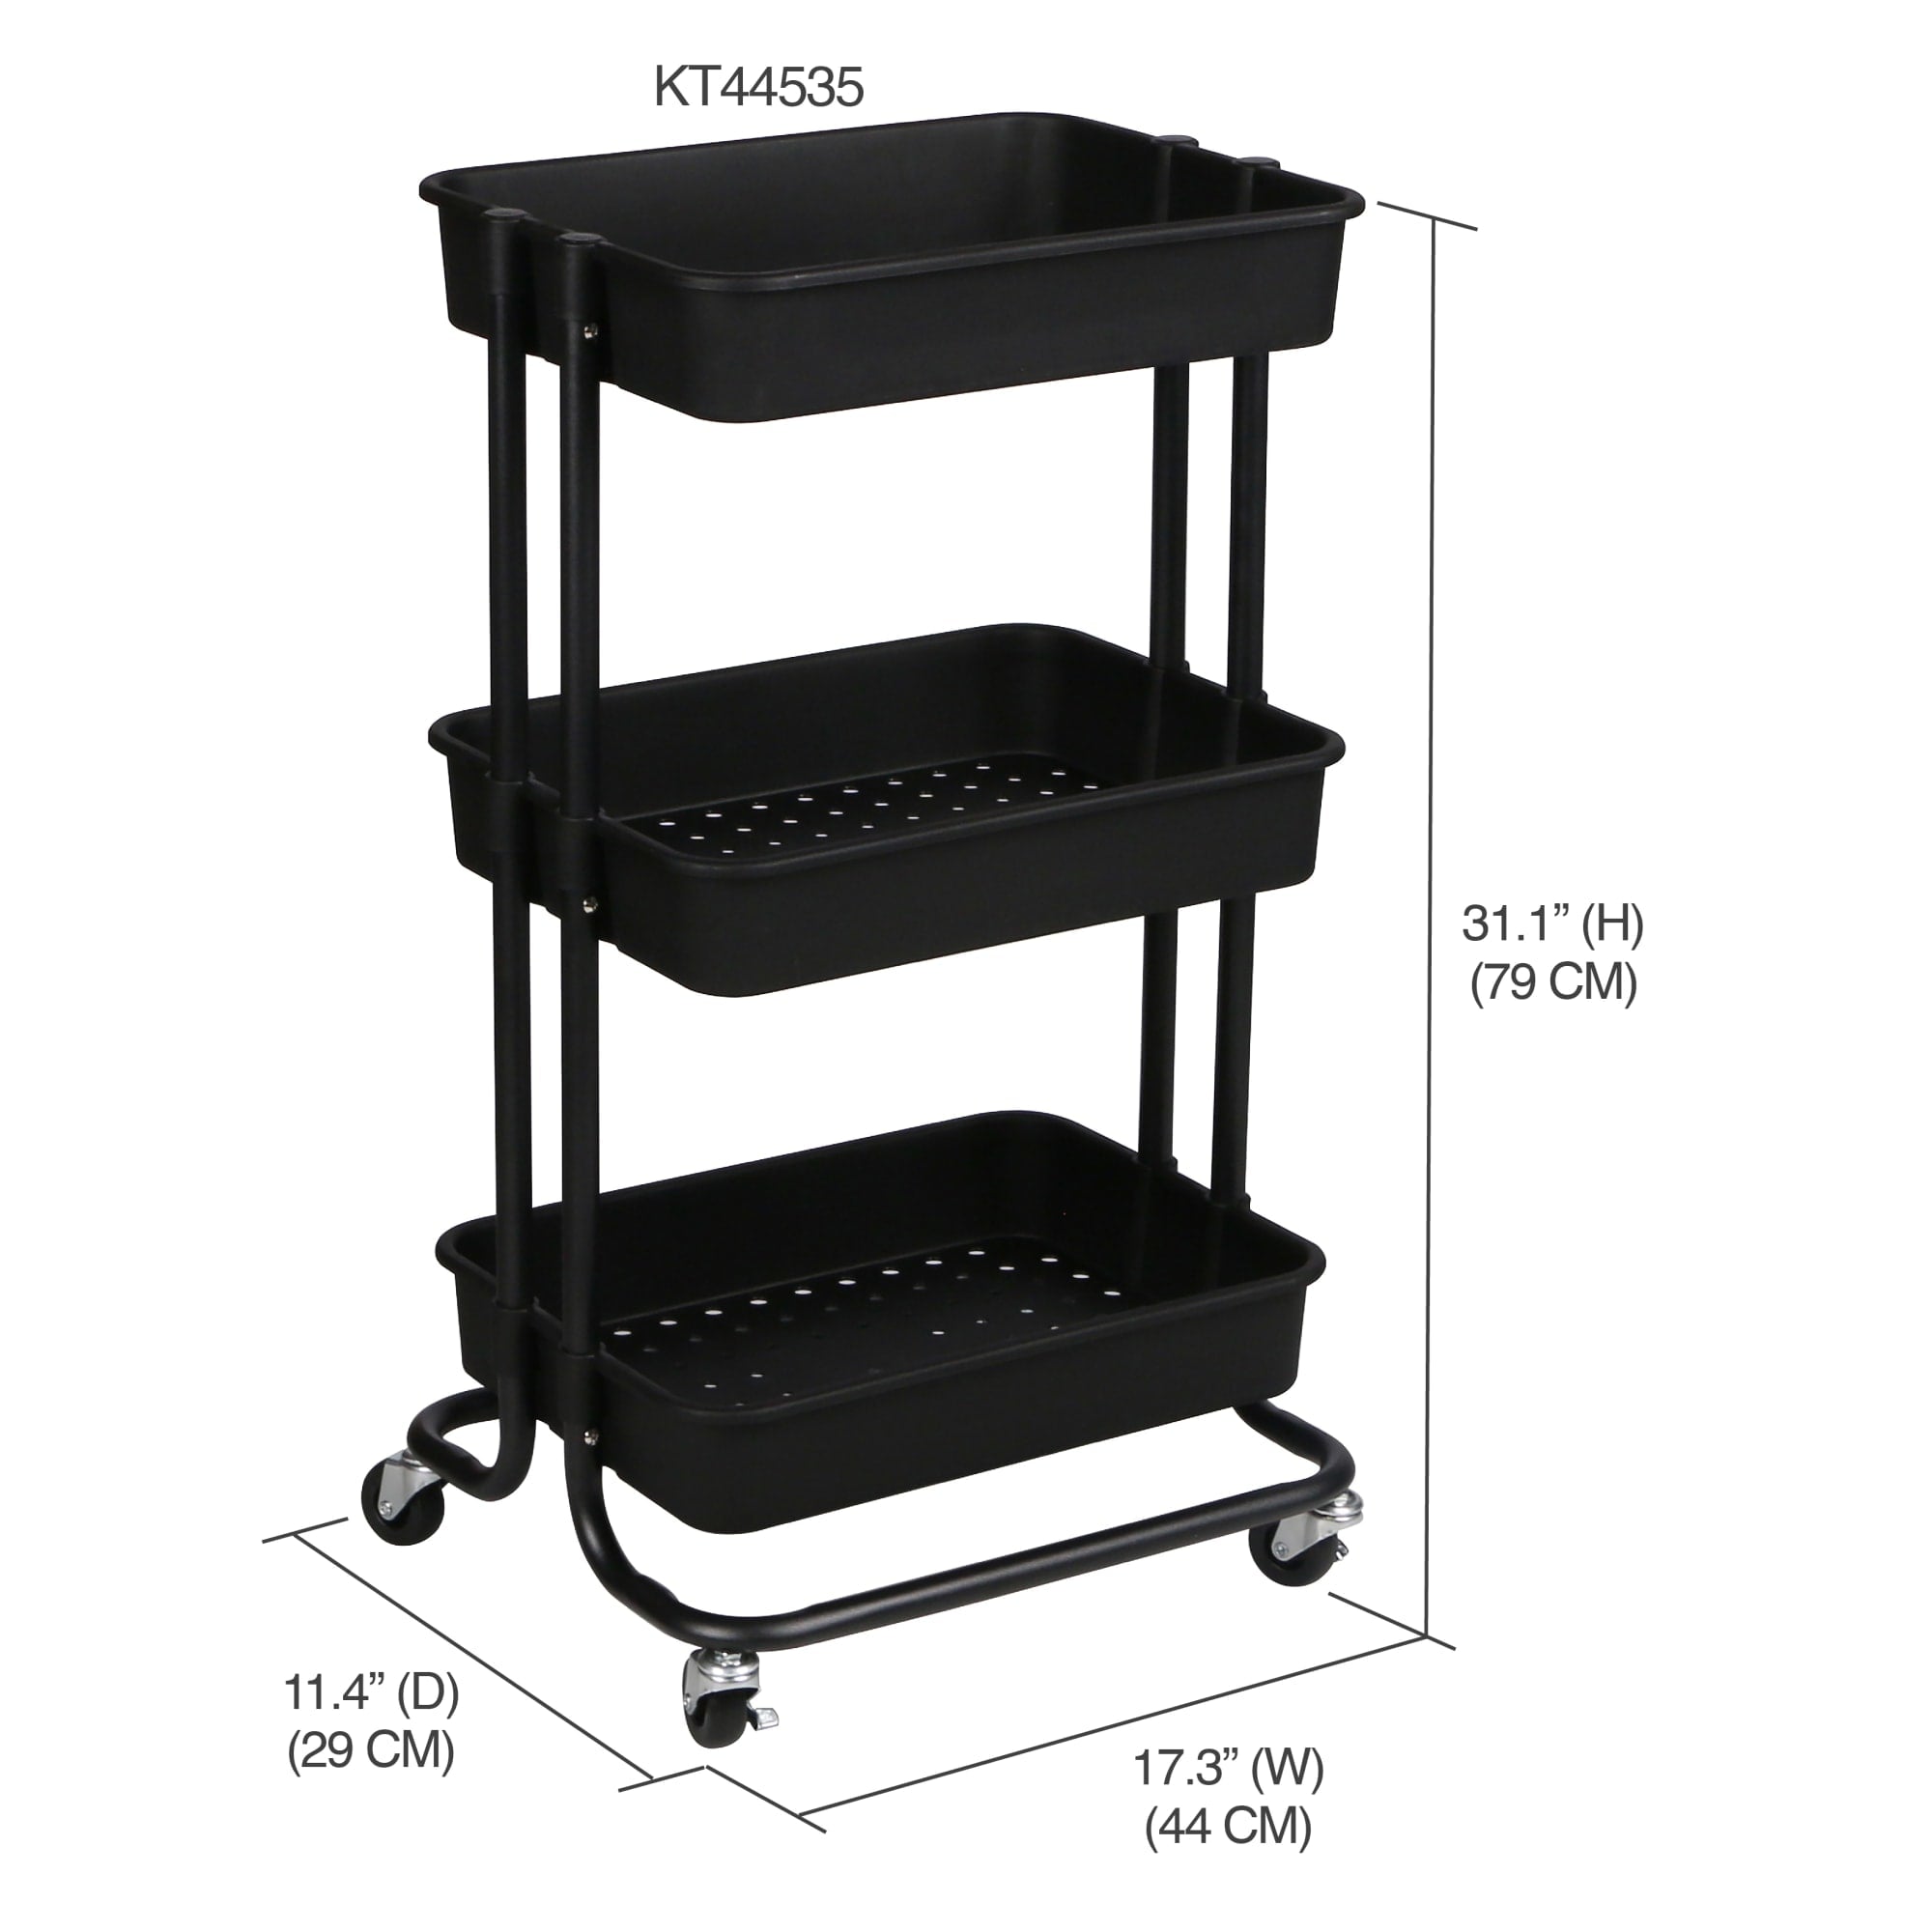 Home Basics 3 Tier Rolling Utility Cart with 2 Locking Wheels, Black $25.00 EACH, CASE PACK OF 3